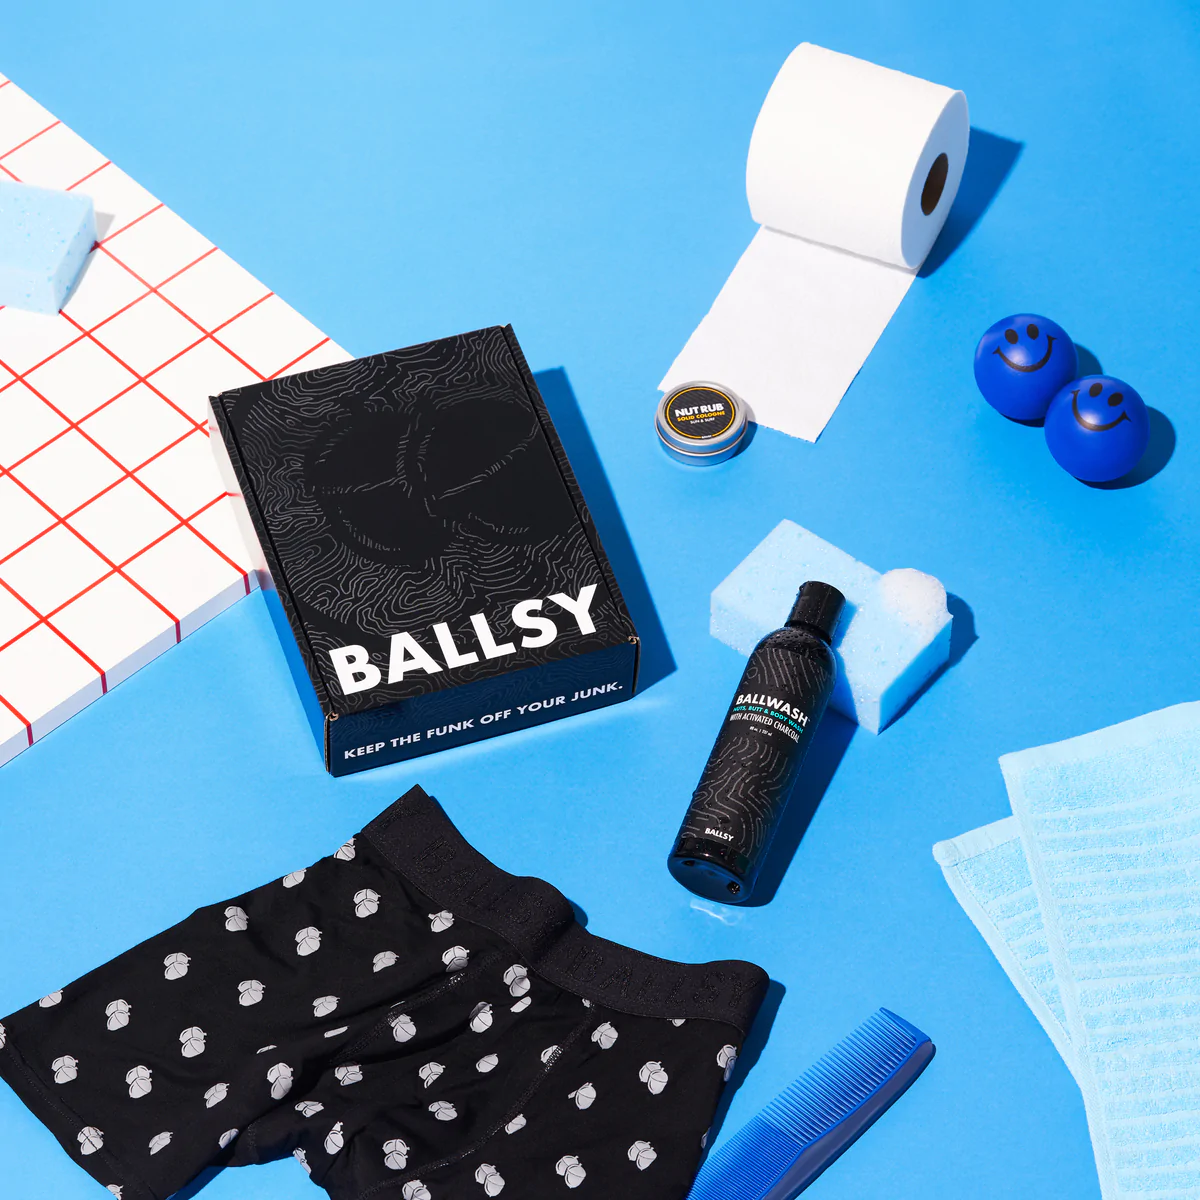 A package from Ballsy next to a pair of boxers and other bathroom items.